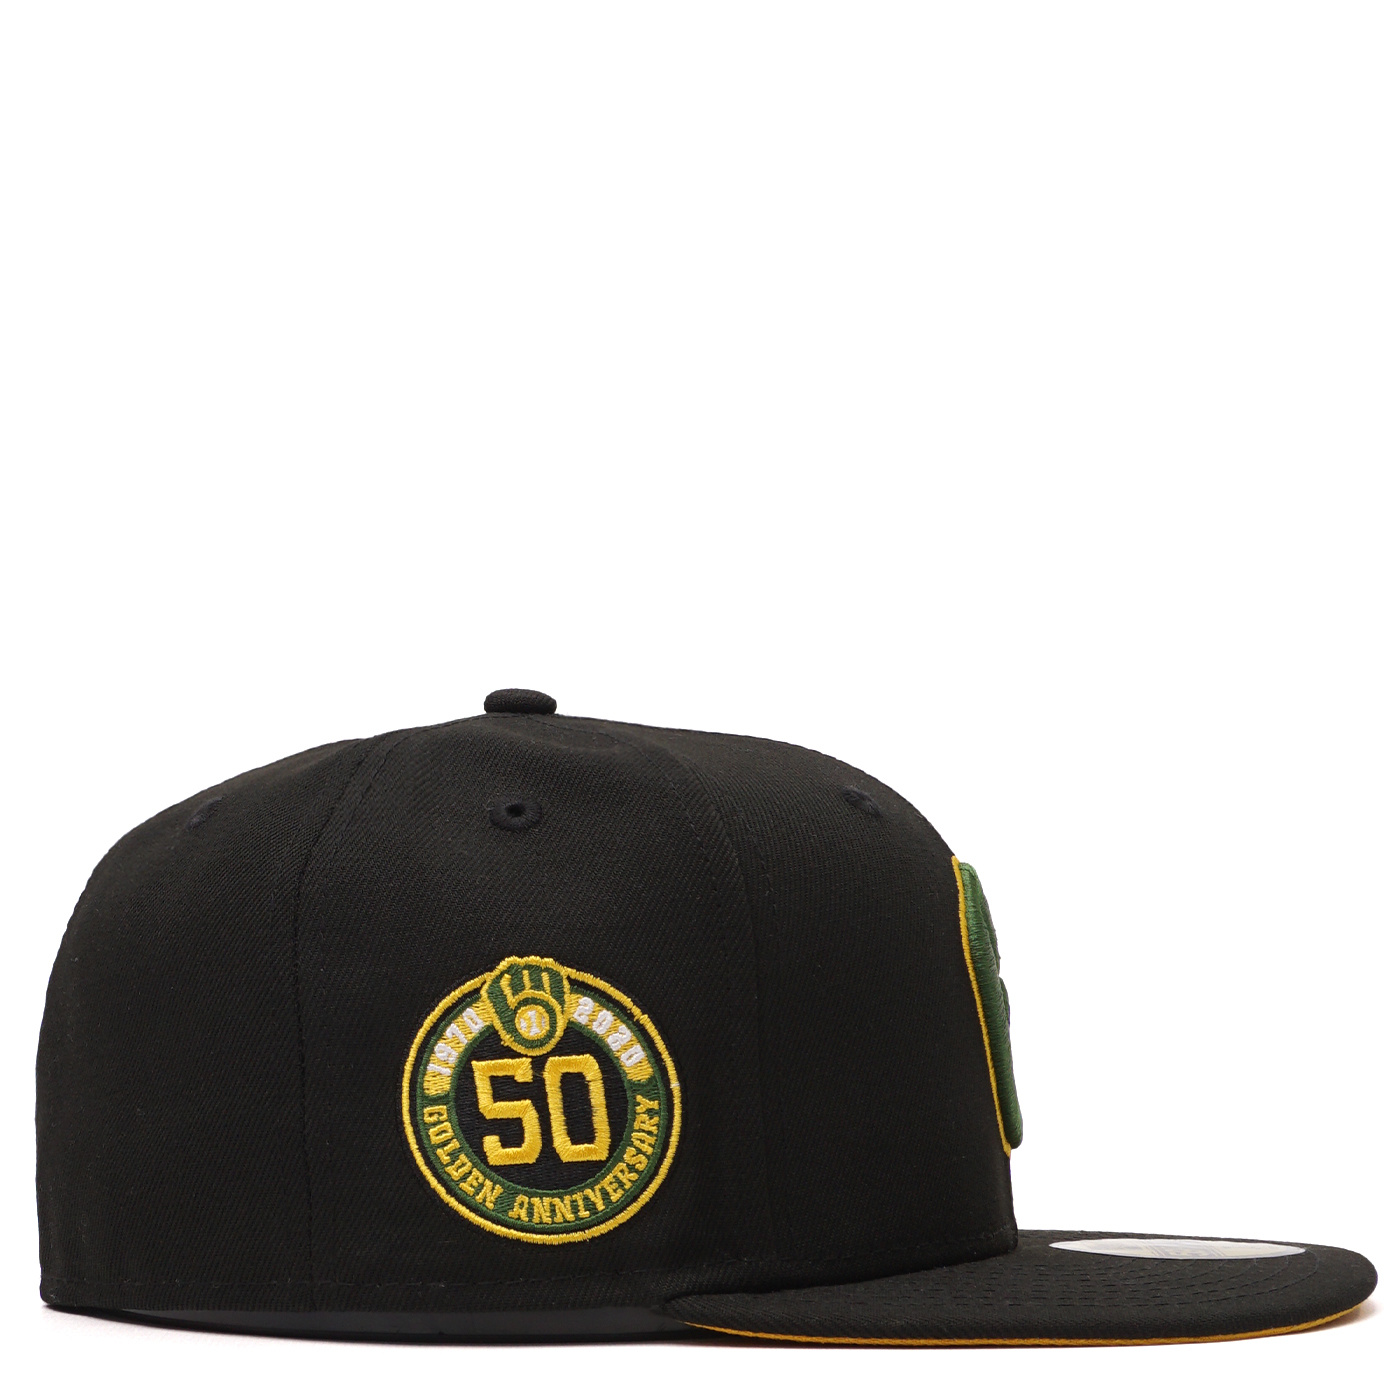 NEW ERA “TEAM” MILWAUKEE BREWERS FITTED HAT – So Fresh Clothing